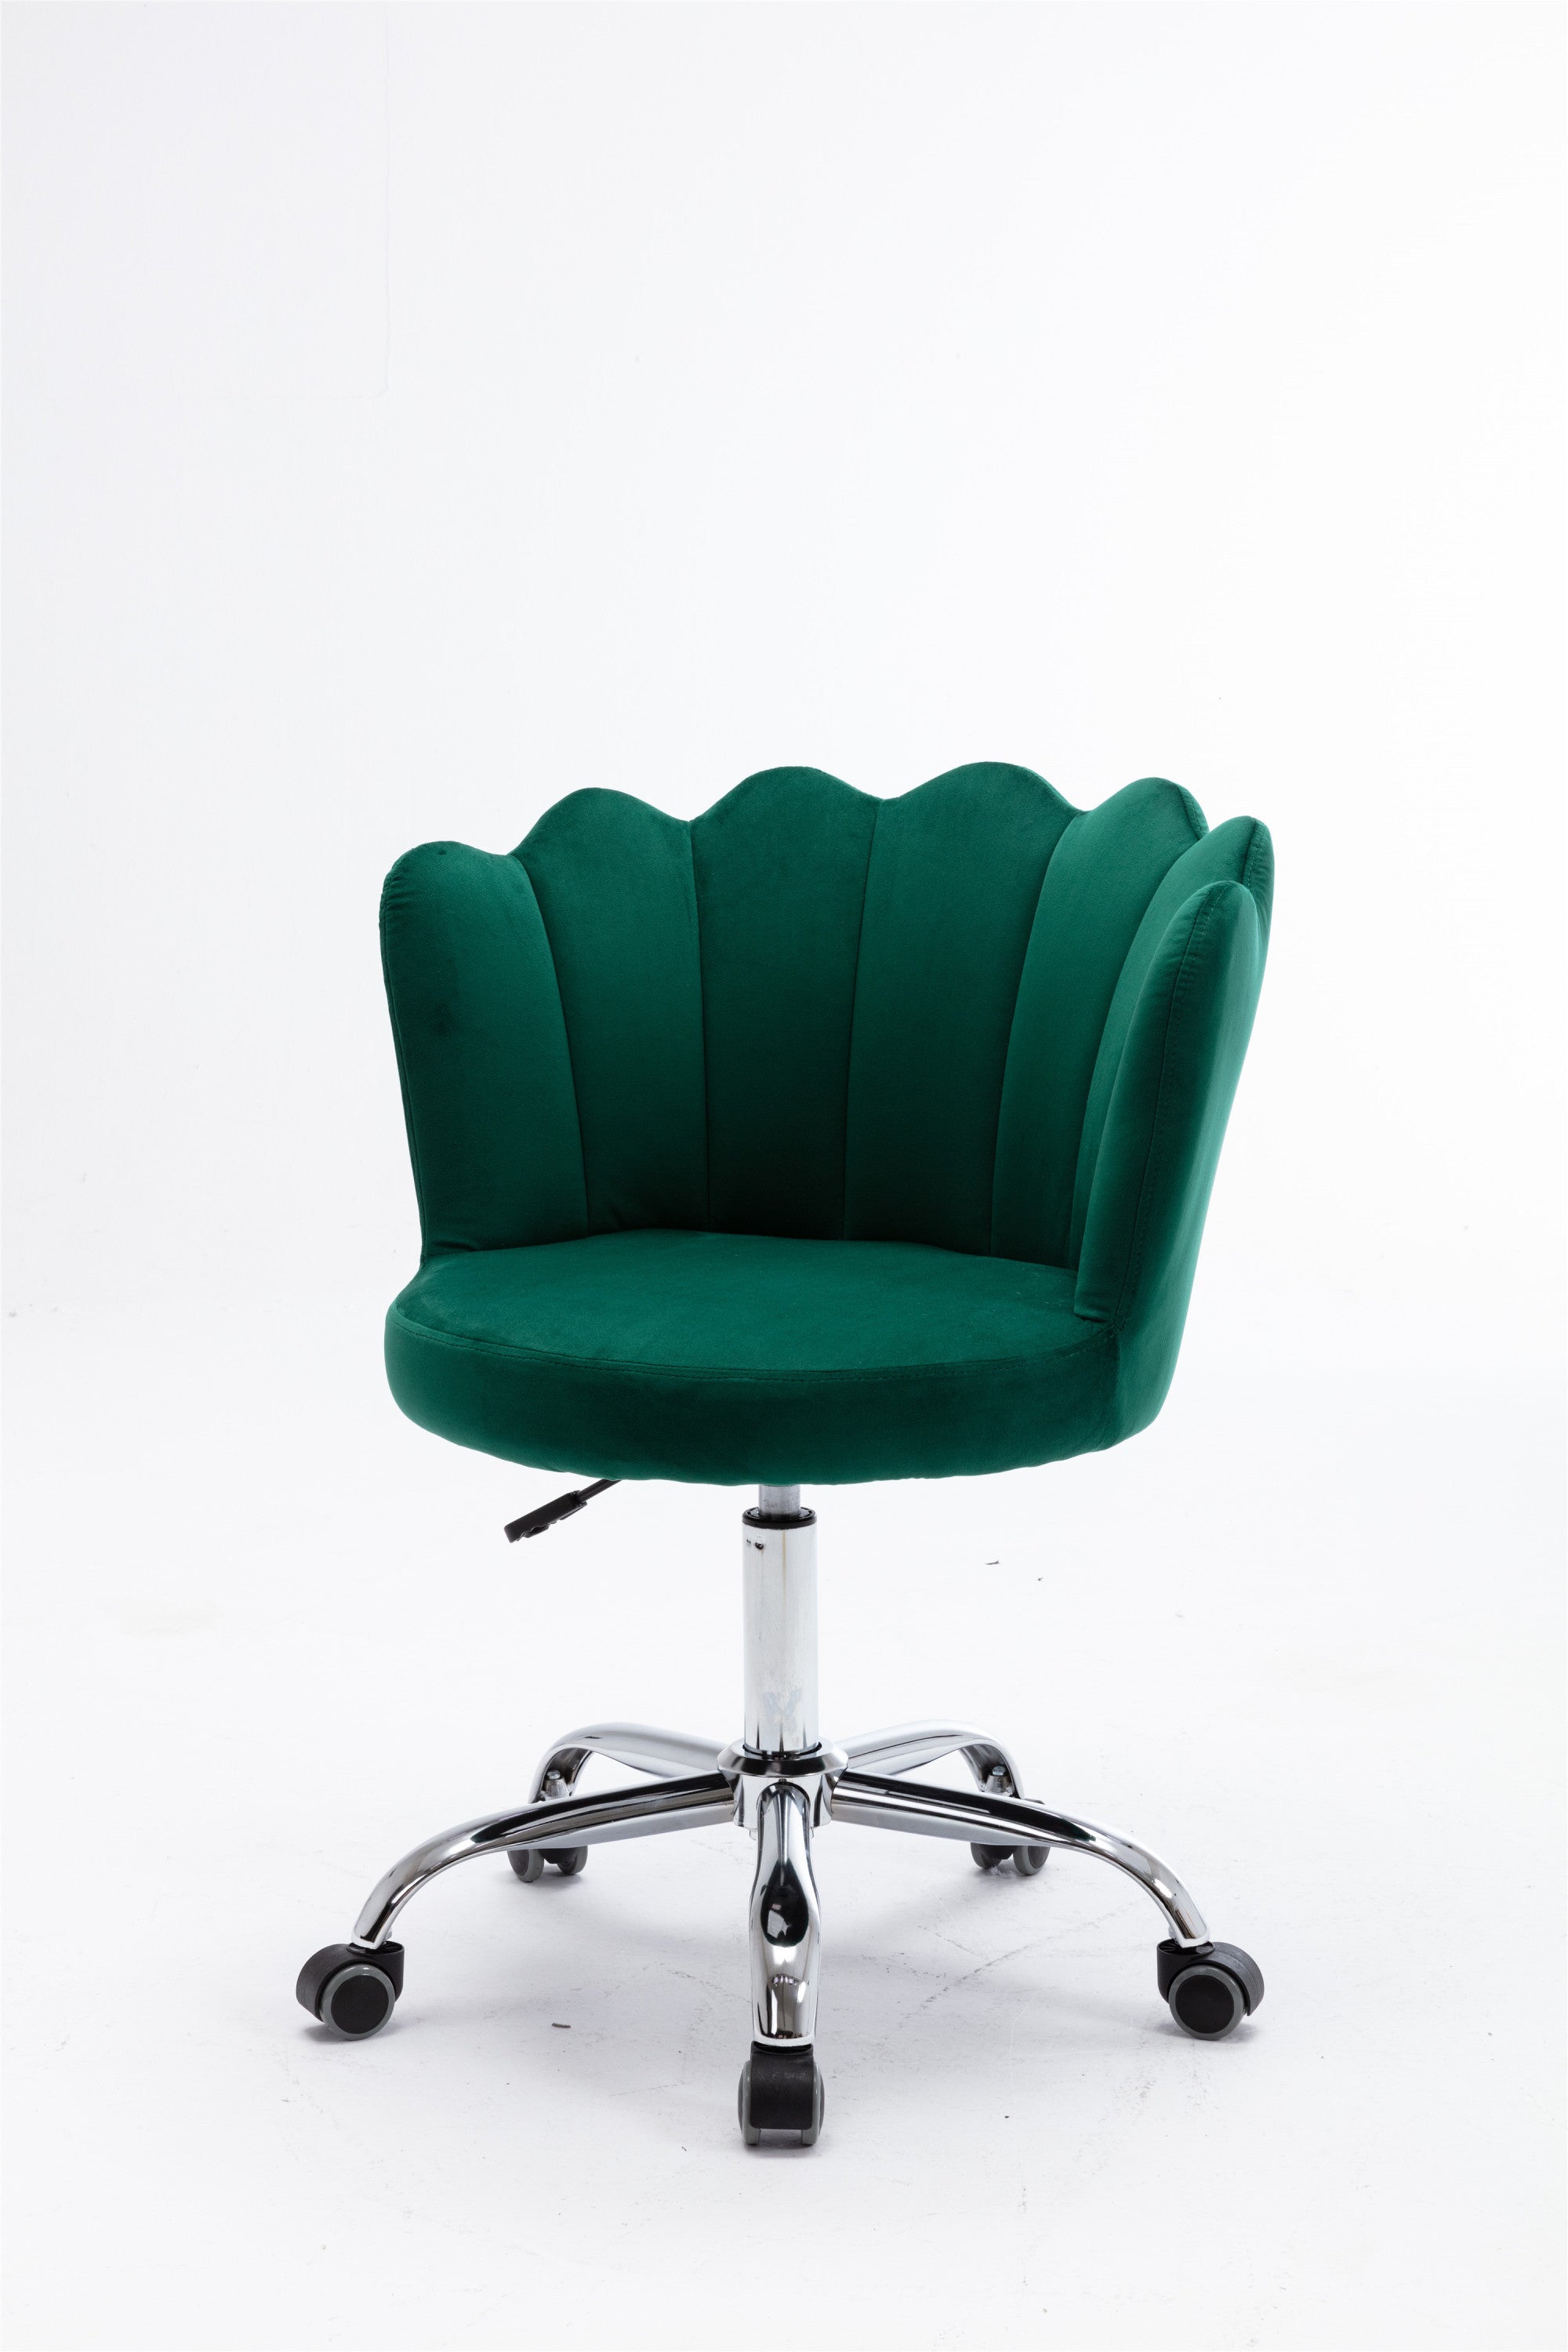 COOLMORE Modern Leisure Office Chair (Green)